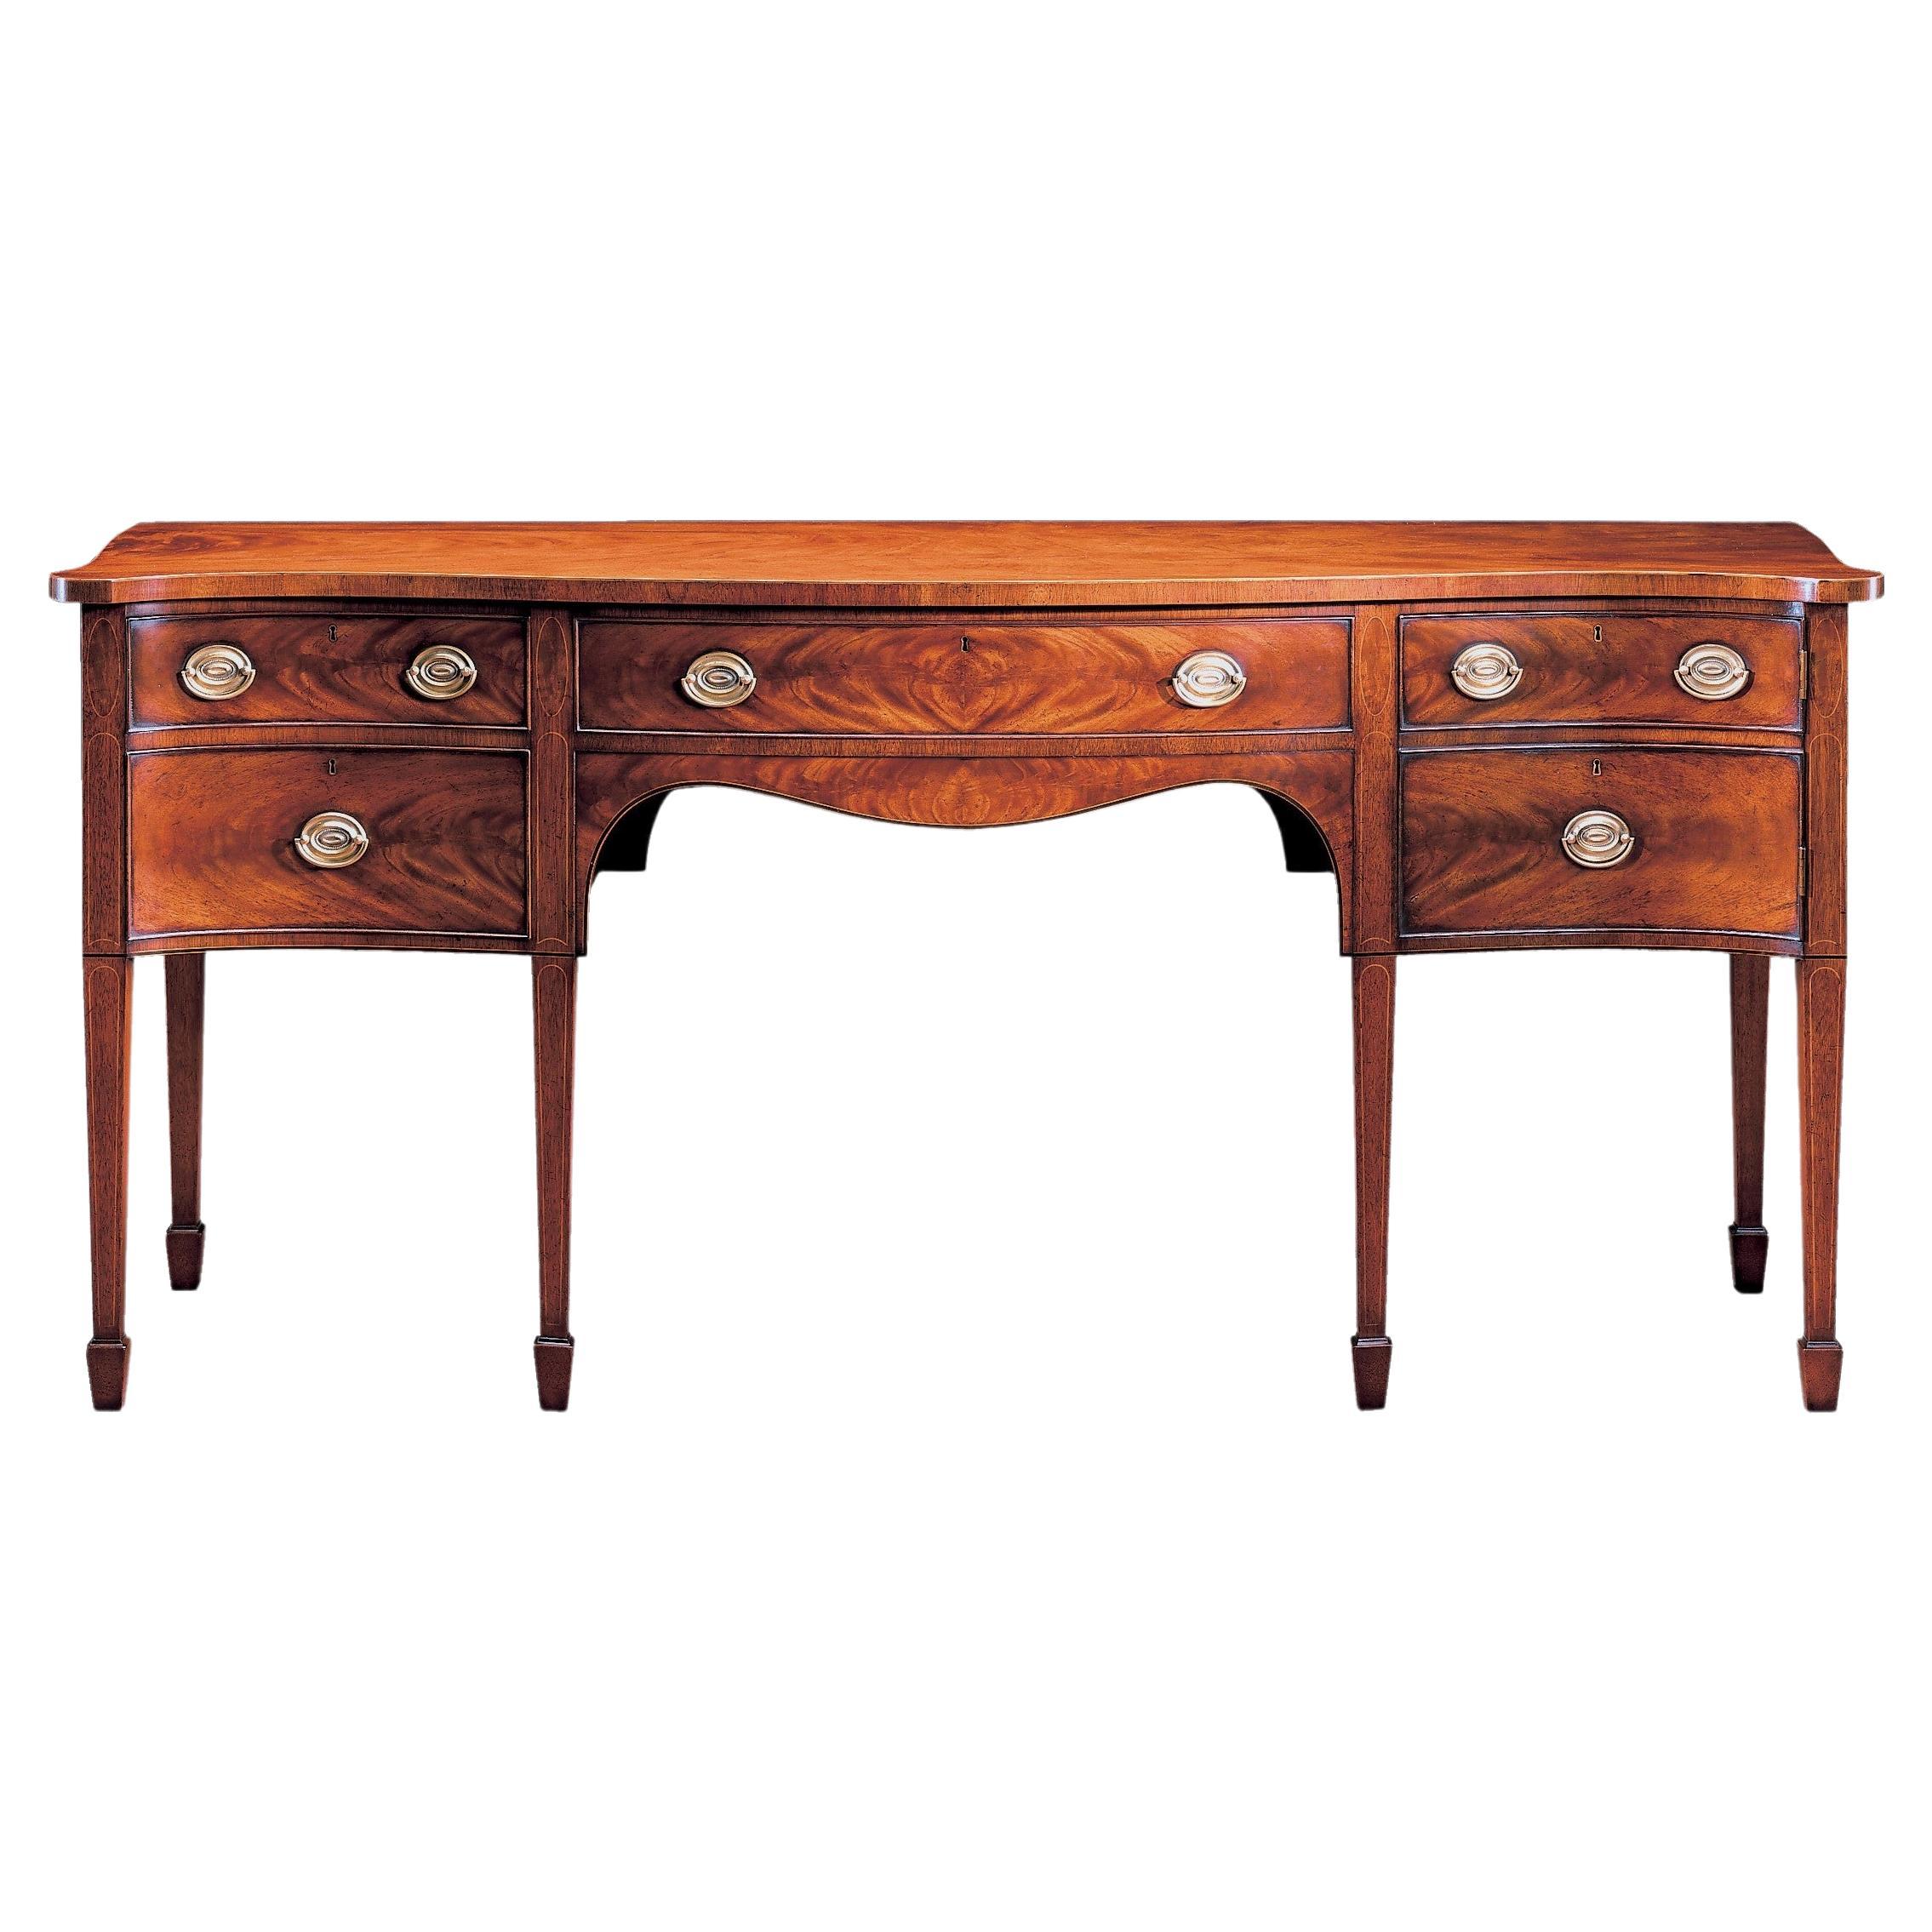 English Bench-Made Mahogany Sheraton Style Serpertine Shape Sideboard with Inlay For Sale